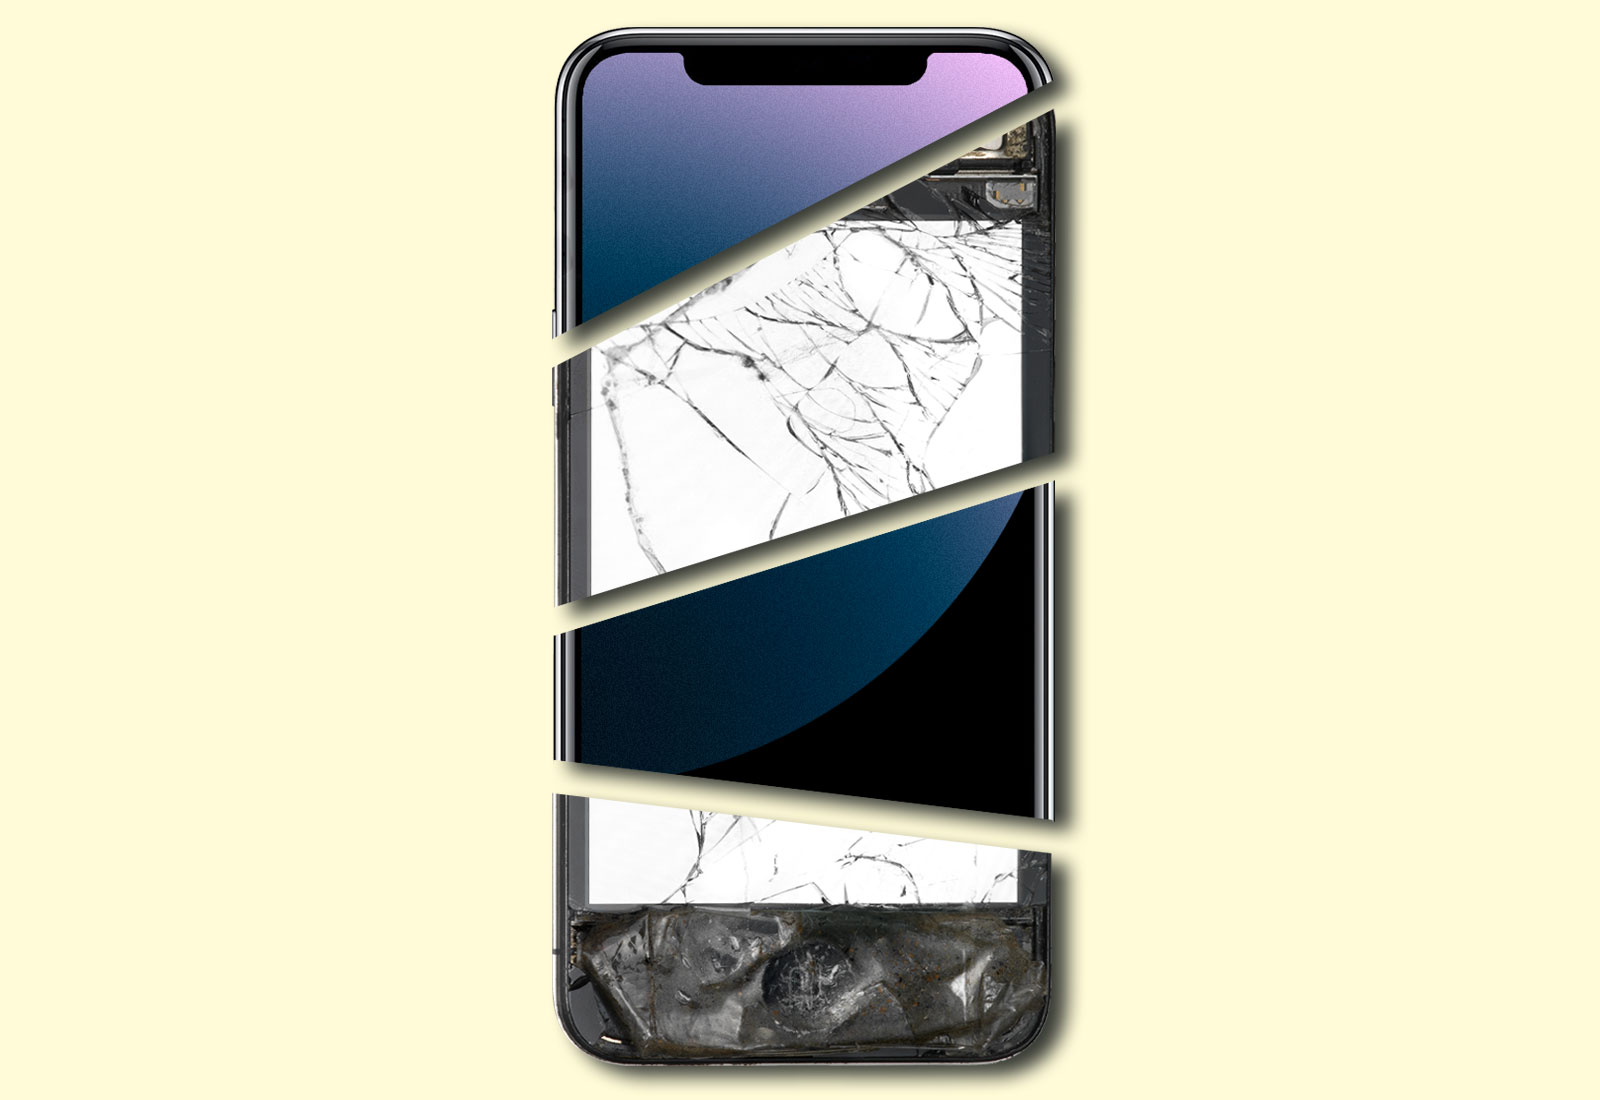 Collage: Pieces of a broken smartphone put together with pieces of a new smartphone